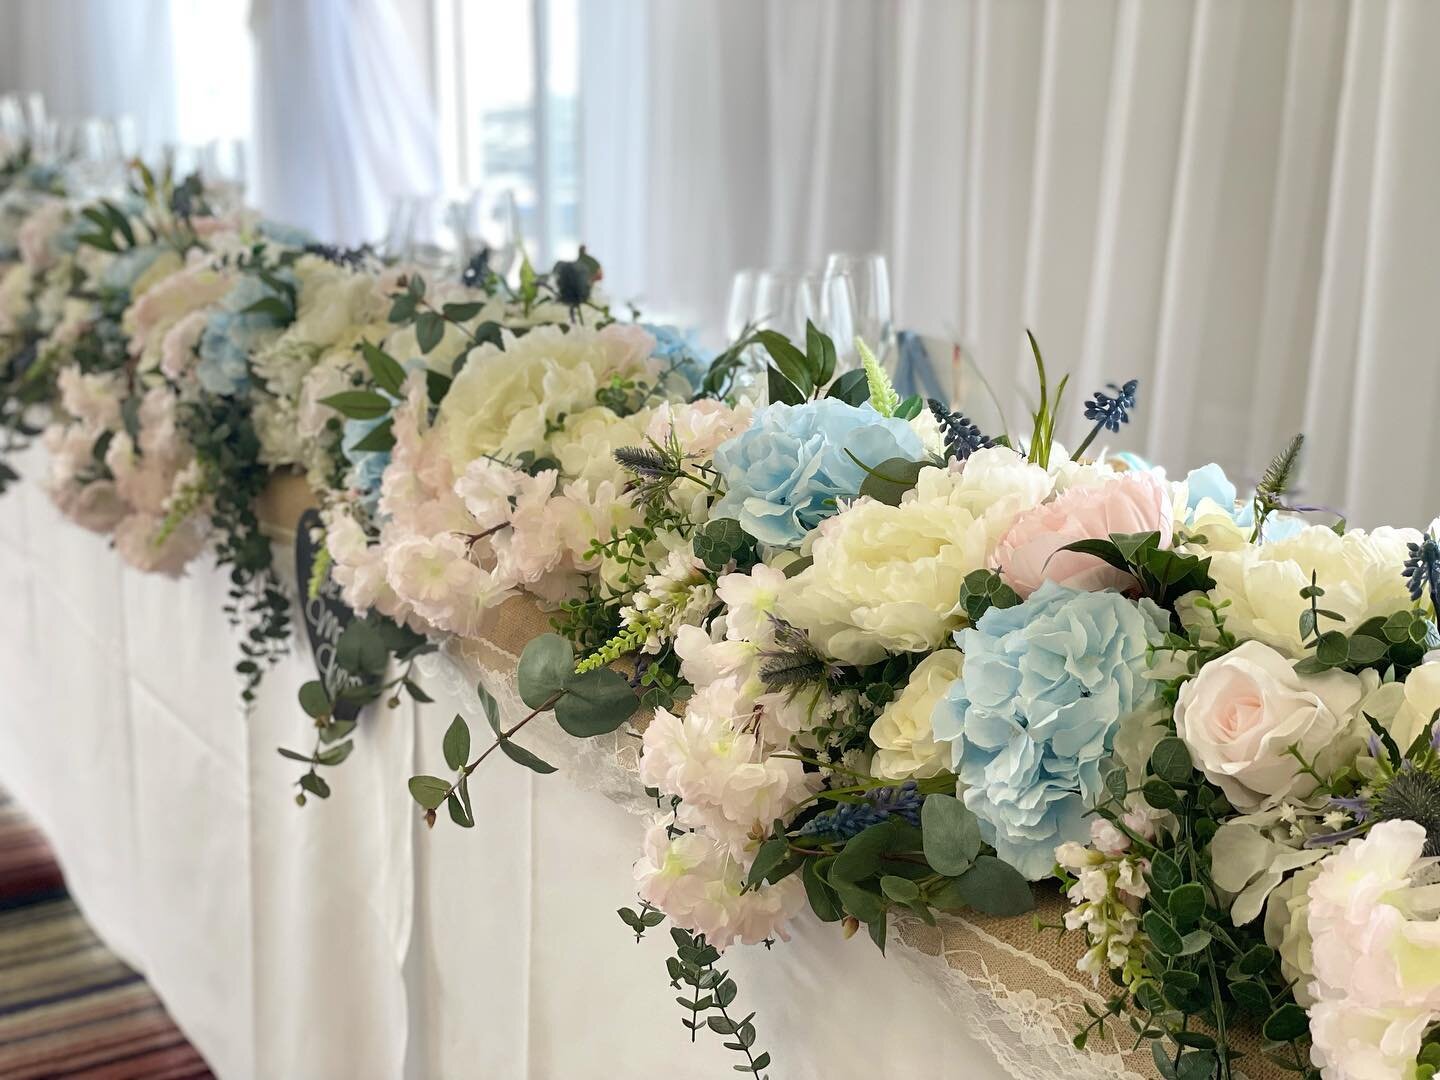 Gorgeous pink and pale blue top table arrangement designed for our lovely friends wedding celebration 💖 #weddingflowers #weddingday #toptablearrangement